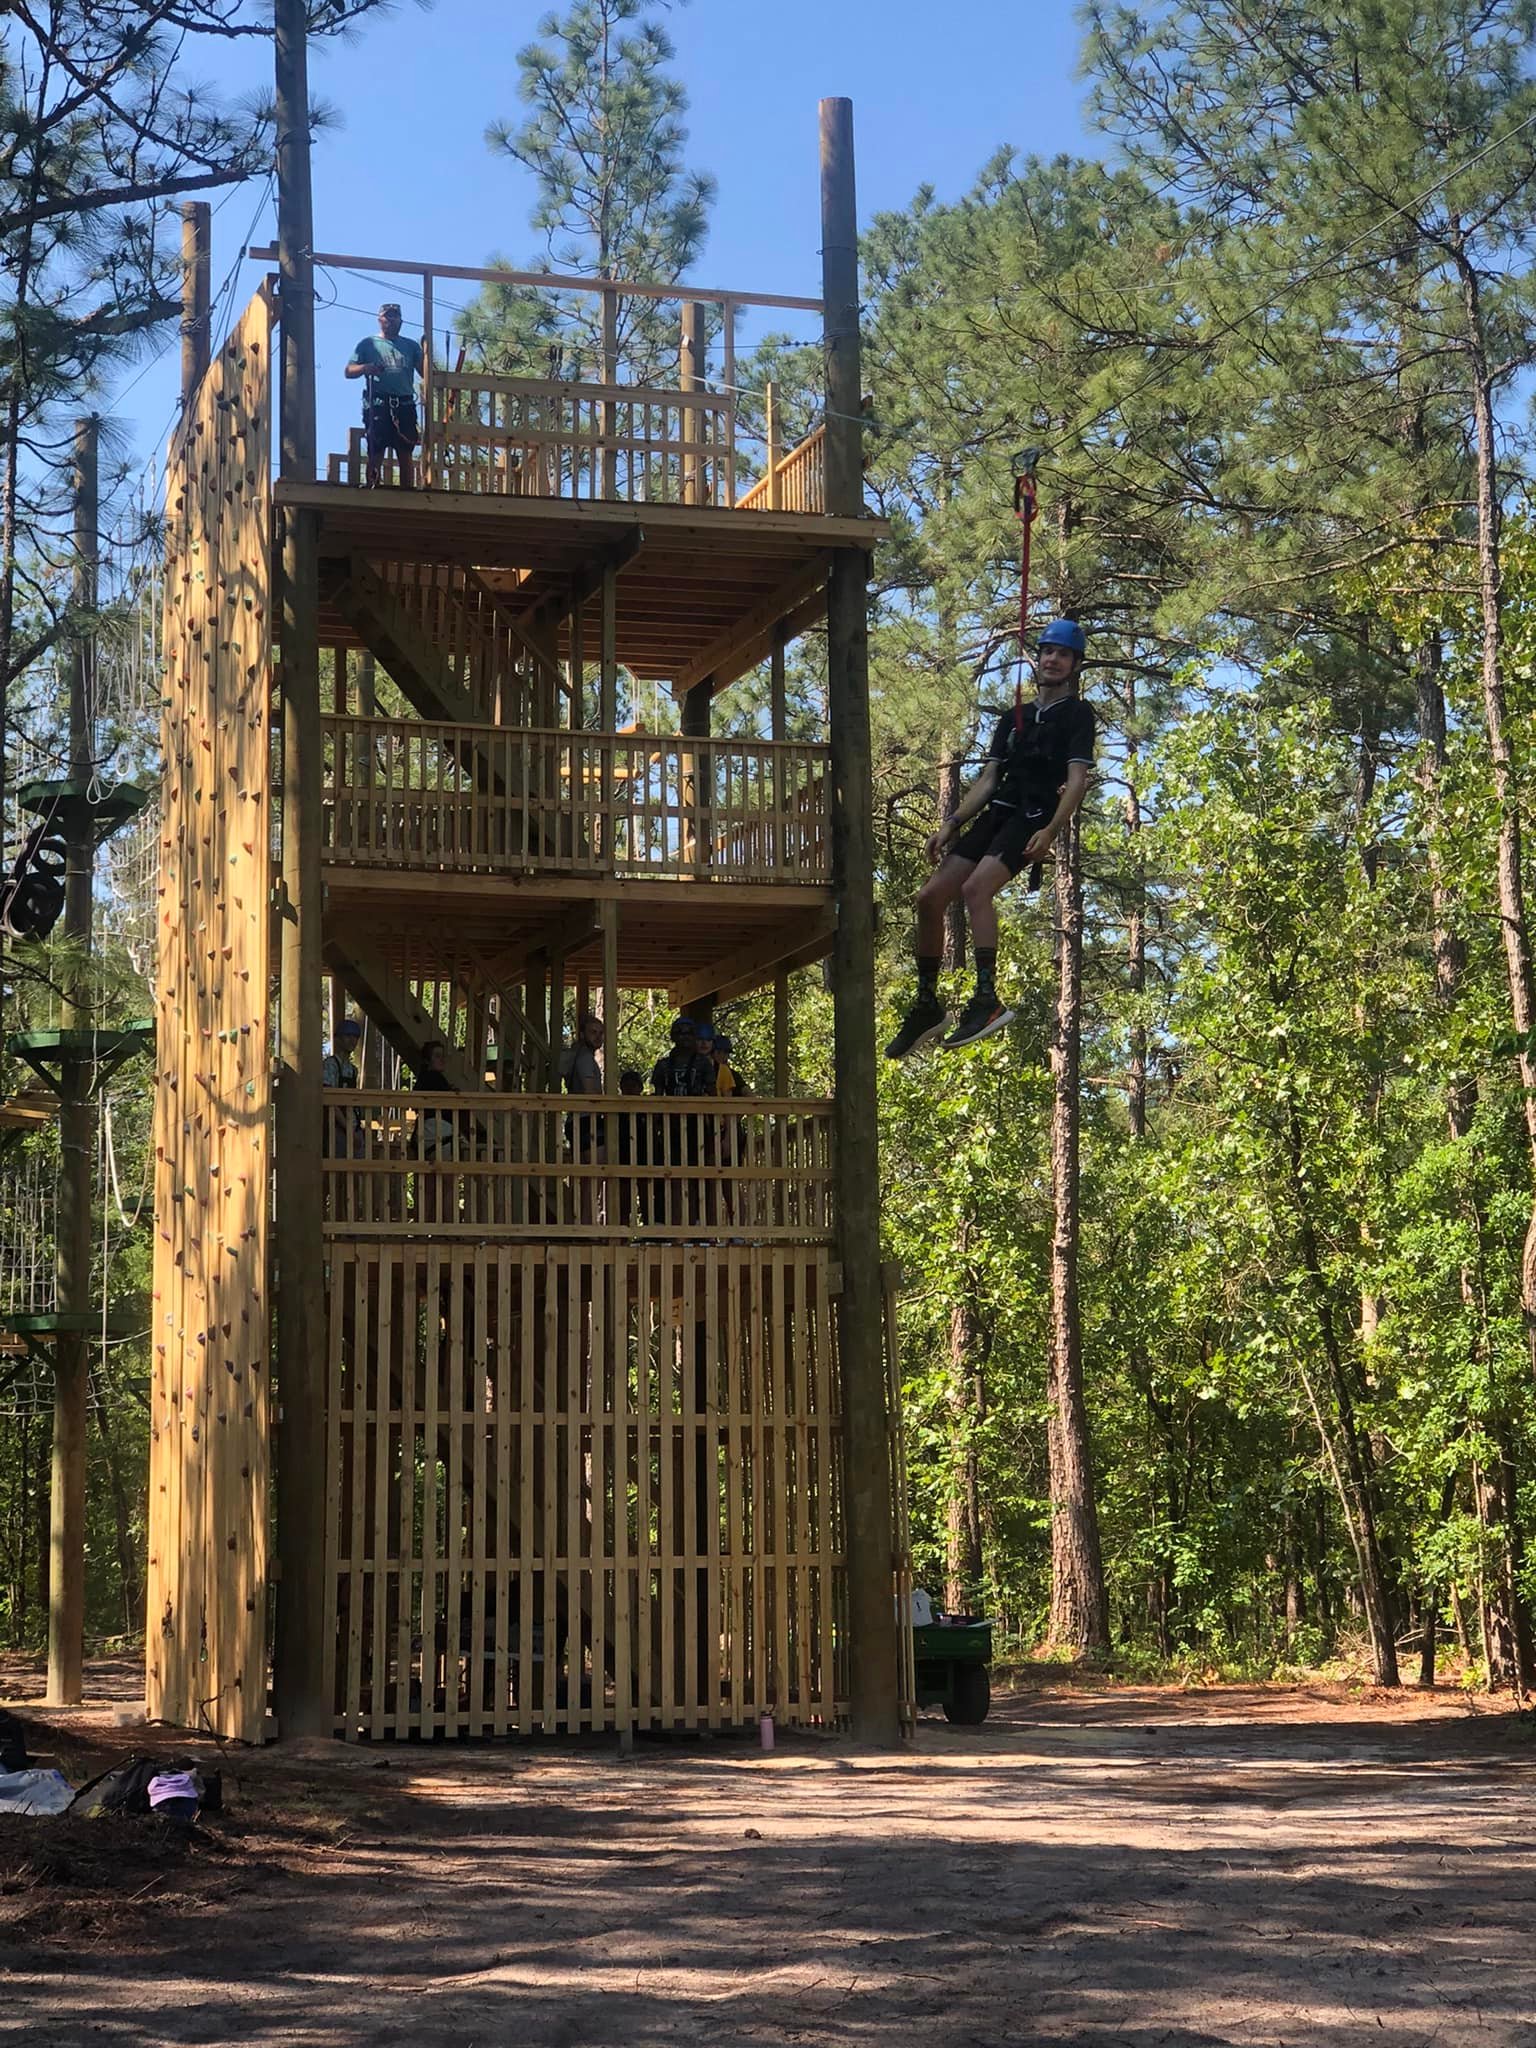 Dual zip lines let you soar like an eagle from the top of our climbing tower across a short expanse and back! Weight: min 60 lbs/ max 250 lbs. All participants must be able to fit the harness.